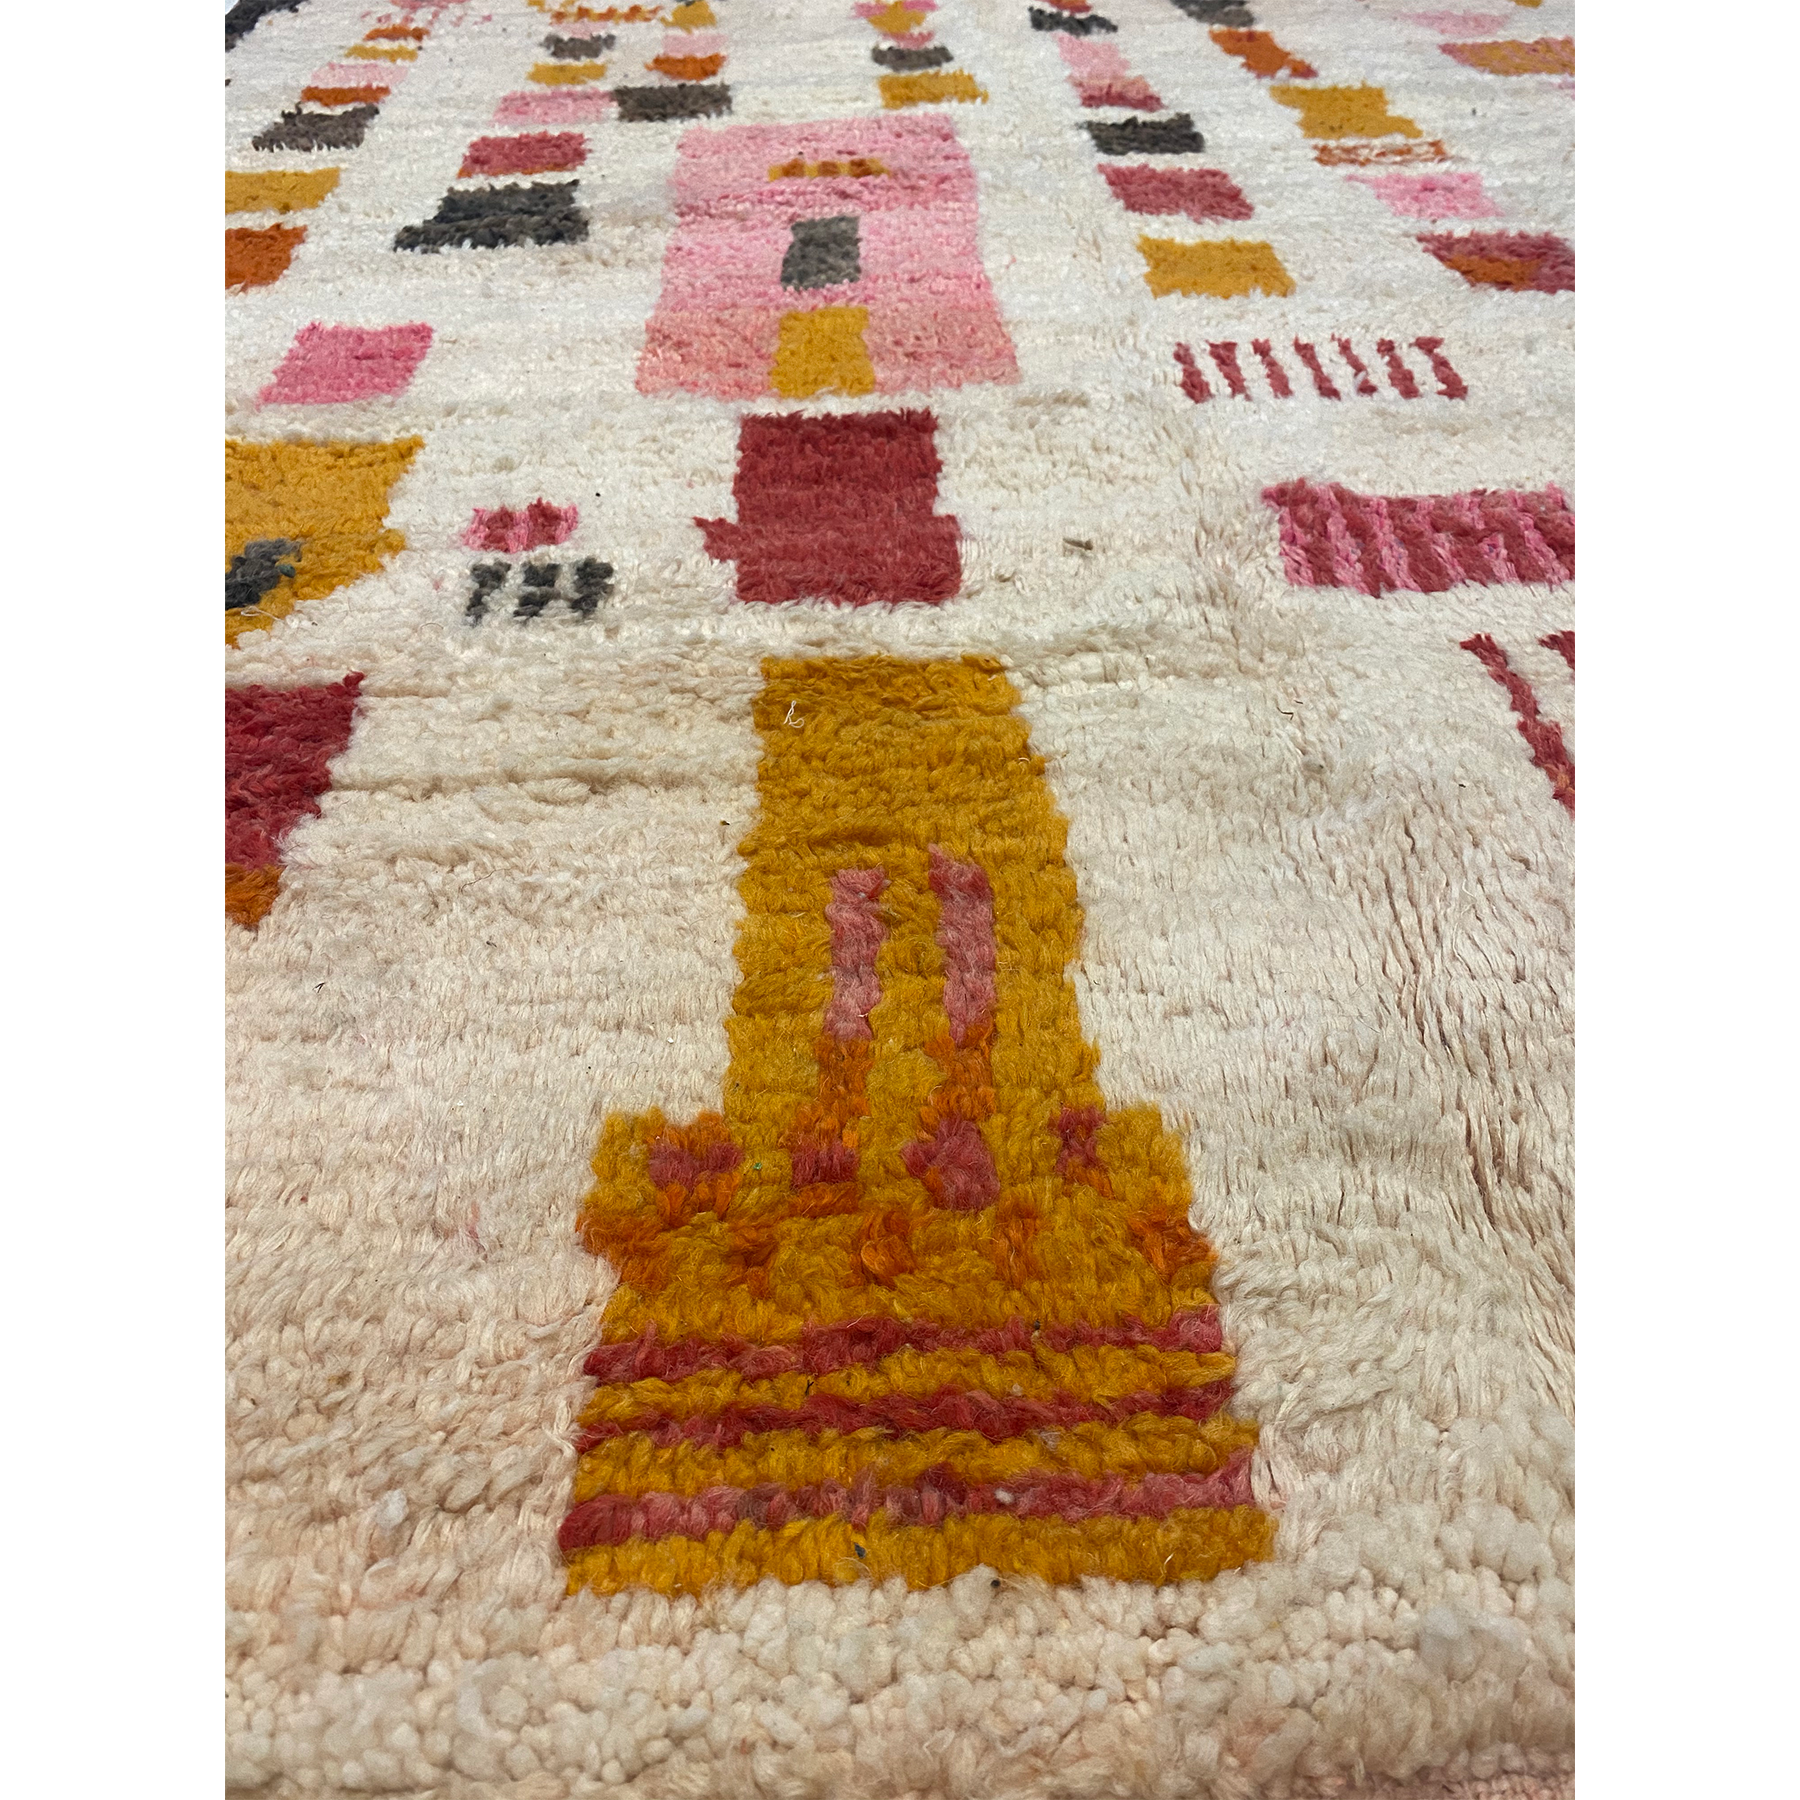 Mustard yellow and red and pink designs on Modern Berber rug